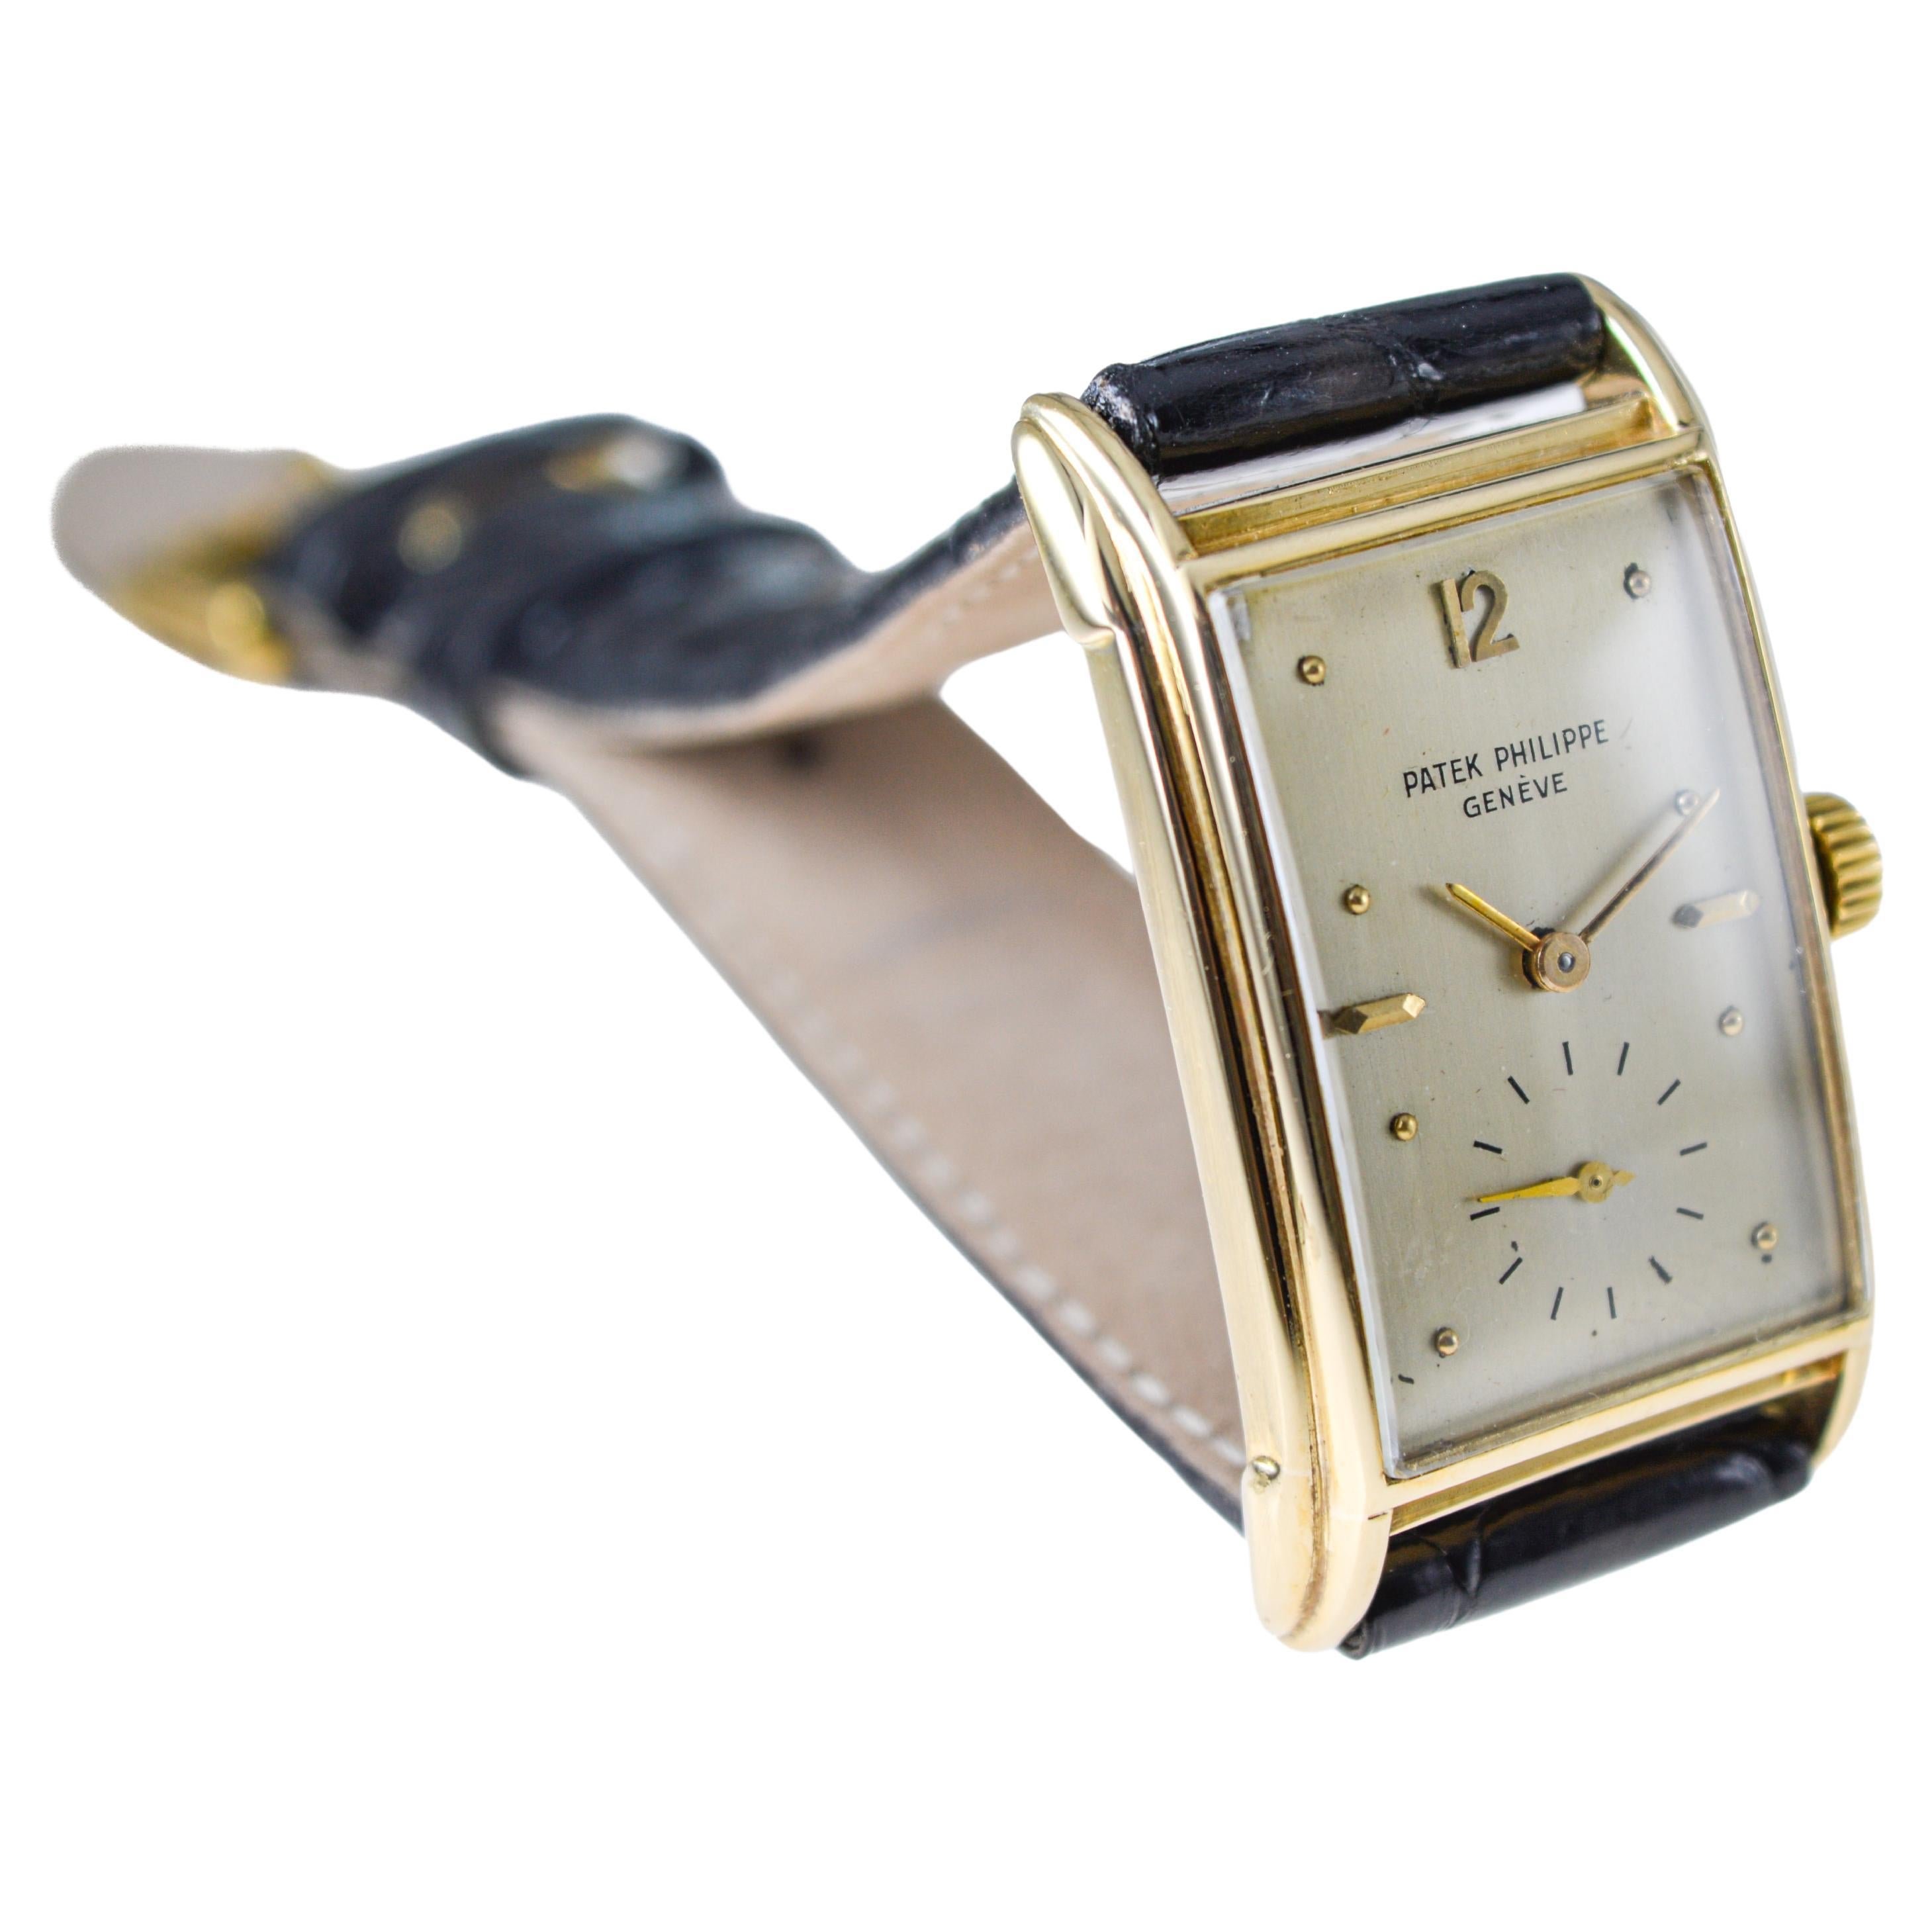 Patek Philippe Yellow Gold Art Deco Style Manual Watch, circa 1948 with Archival For Sale 3